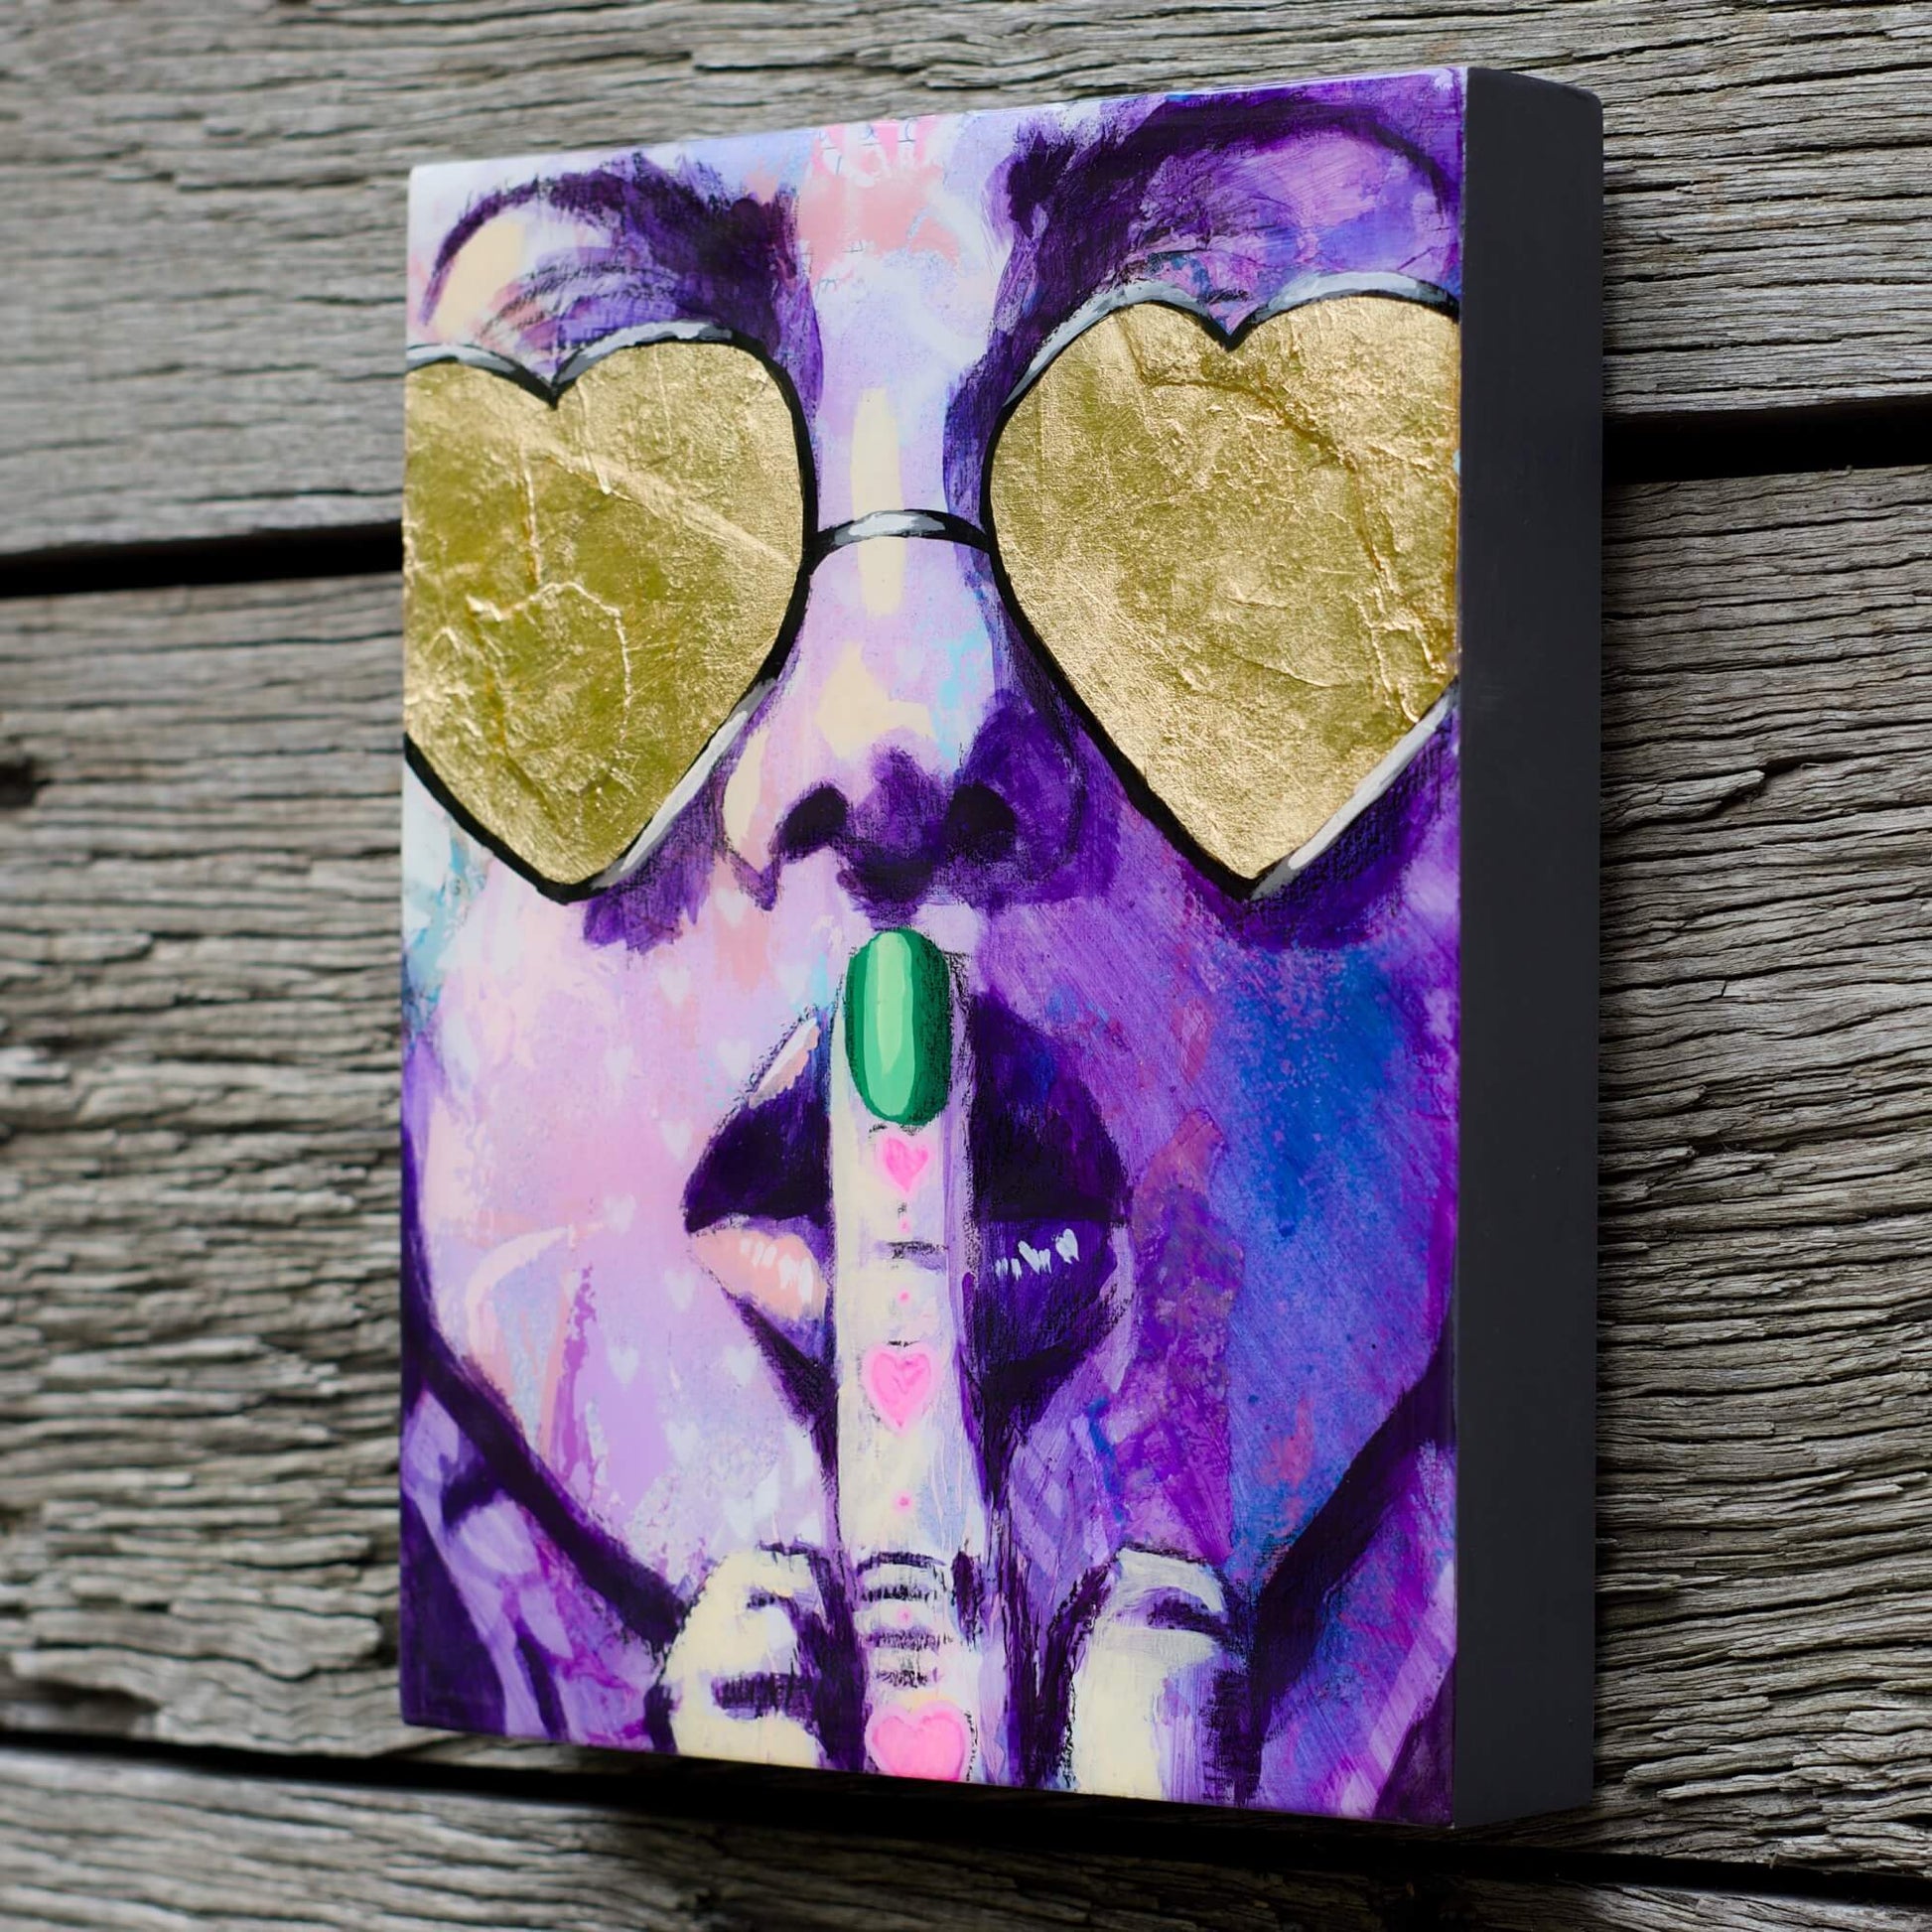 Artwork for Sale – Mini Street Art Style Painting – Purple & Gold – Mixed Media Art – 'No Words' – Art Wall Painting Criss Chaney